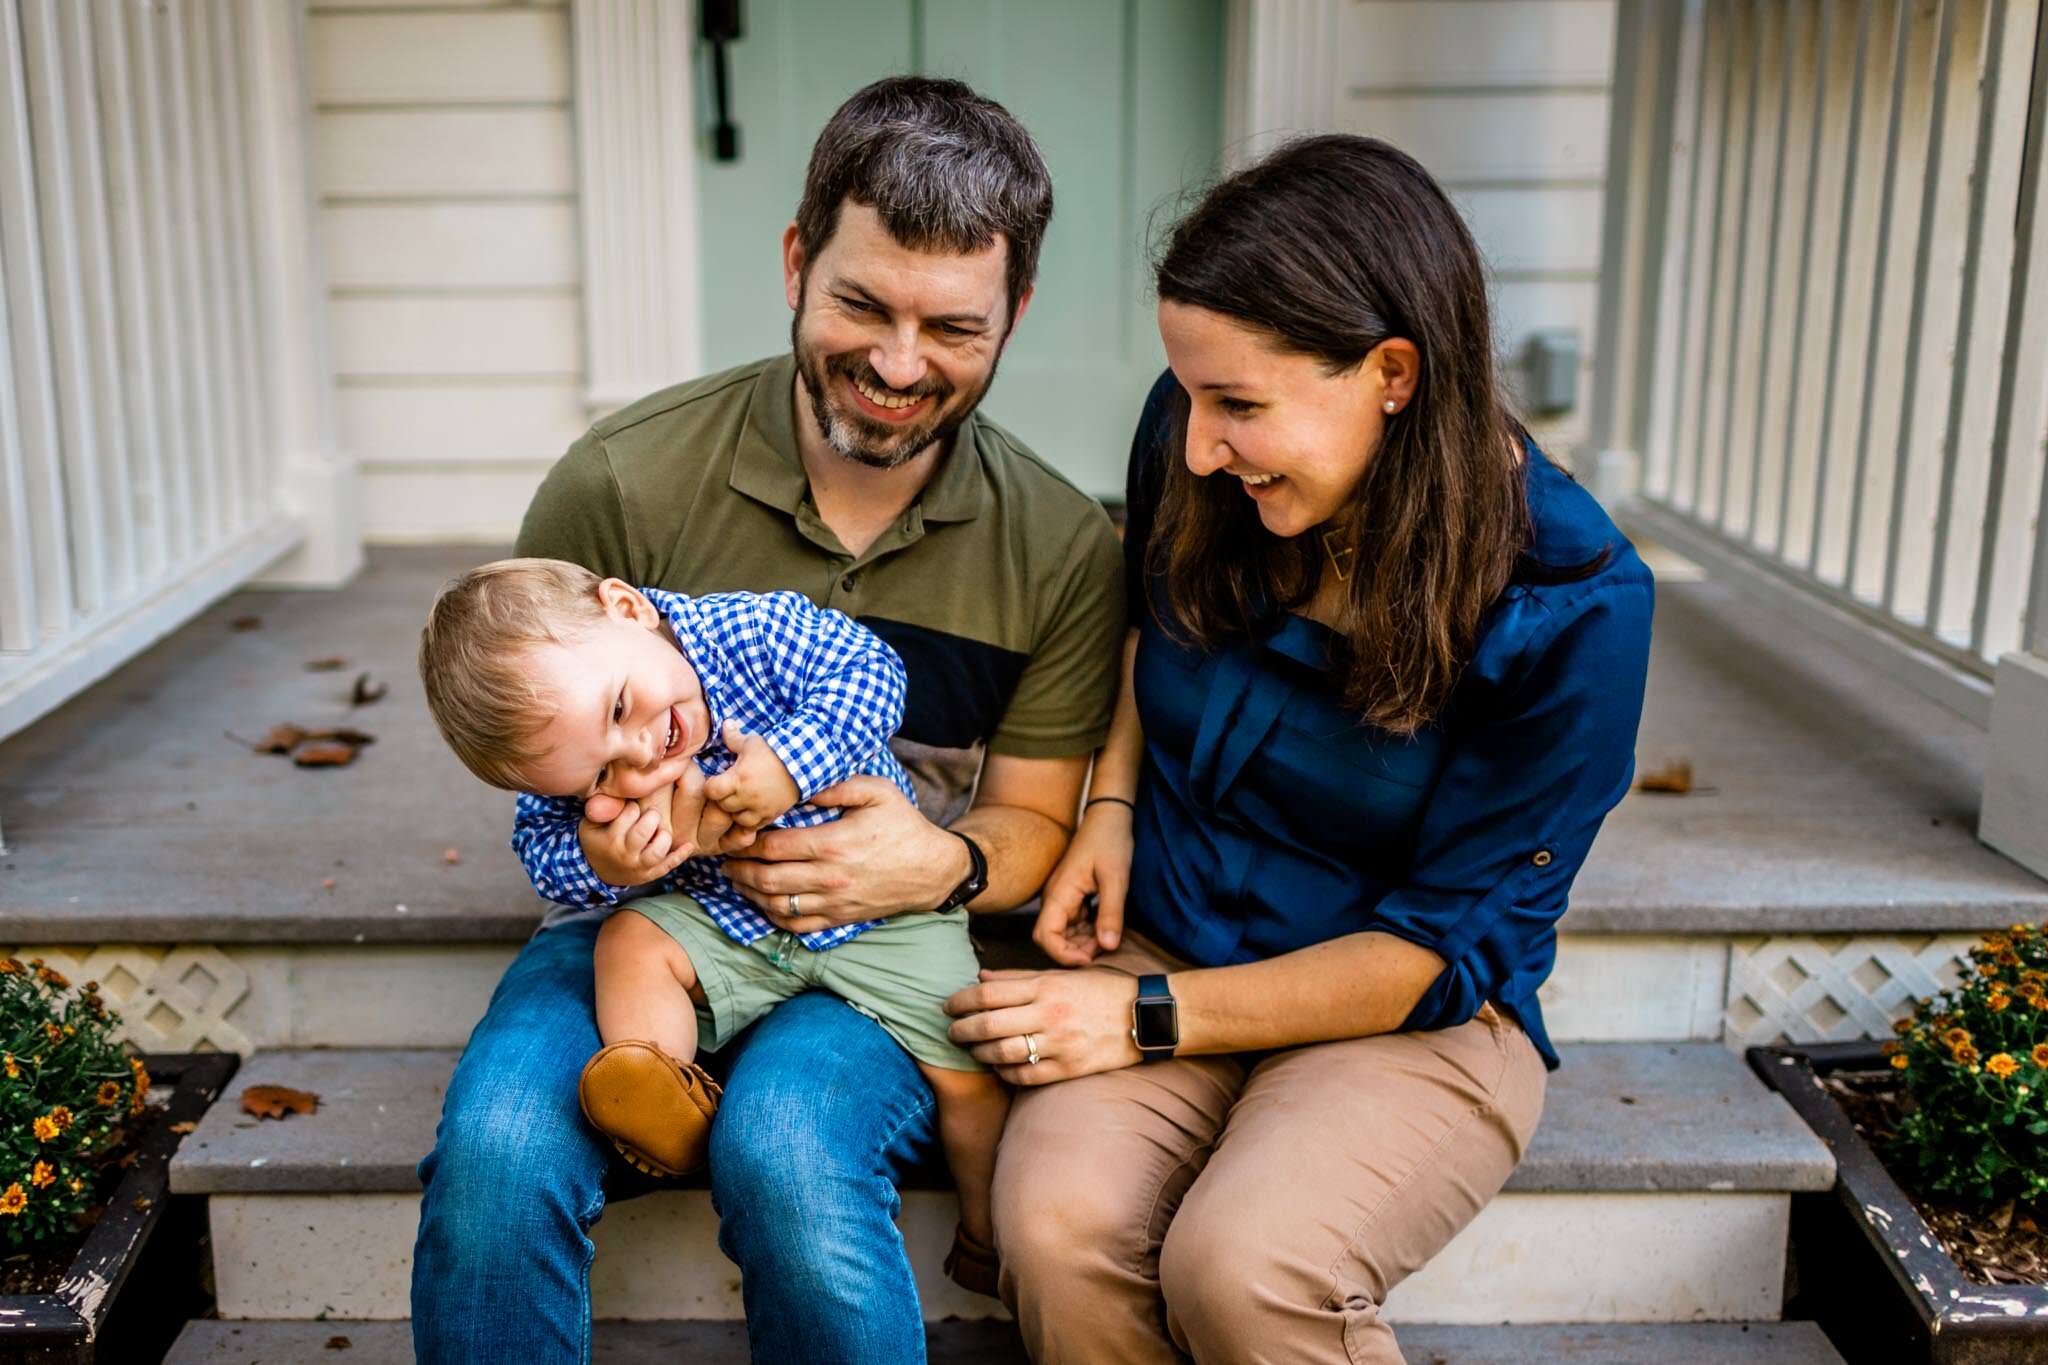 Raleigh Family Photographer | By G. Lin Photography | Family laughing together on front porch